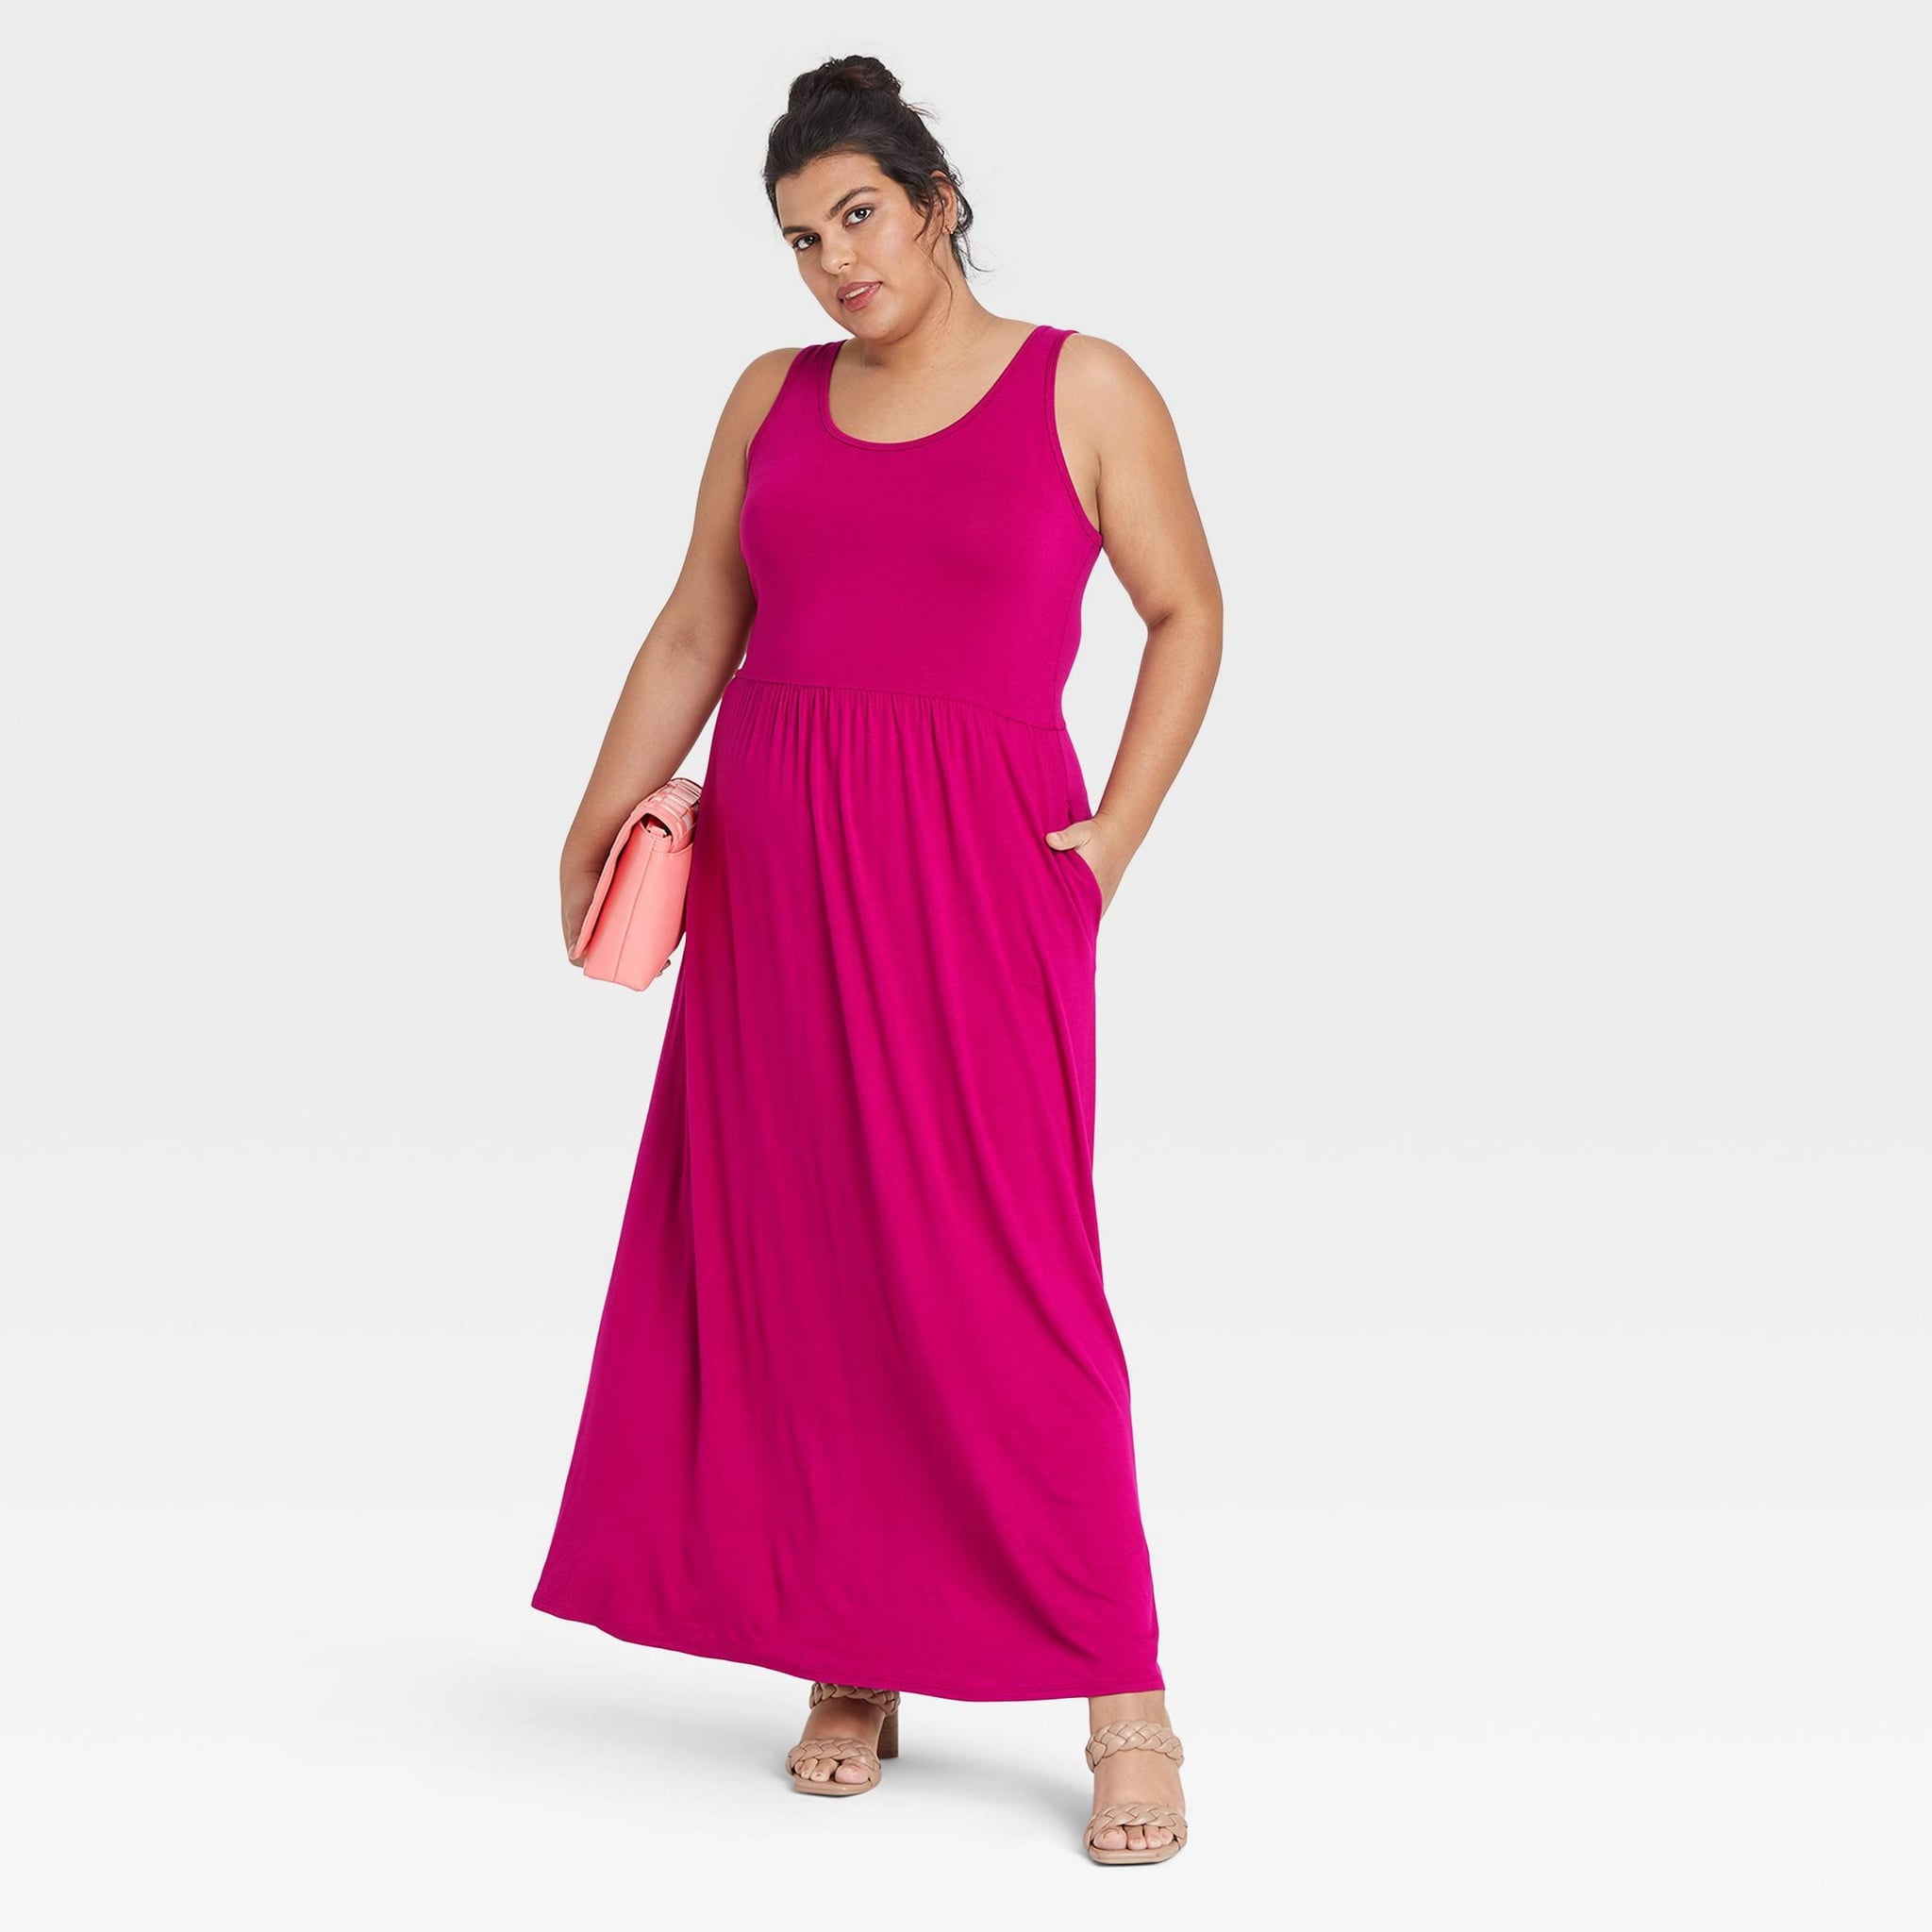 Ava & Viv Plus Size Sleeveless Knit Babydoll Dress, These Are the 18 Best  Deals We're Shopping From Target's Deal Days Sale